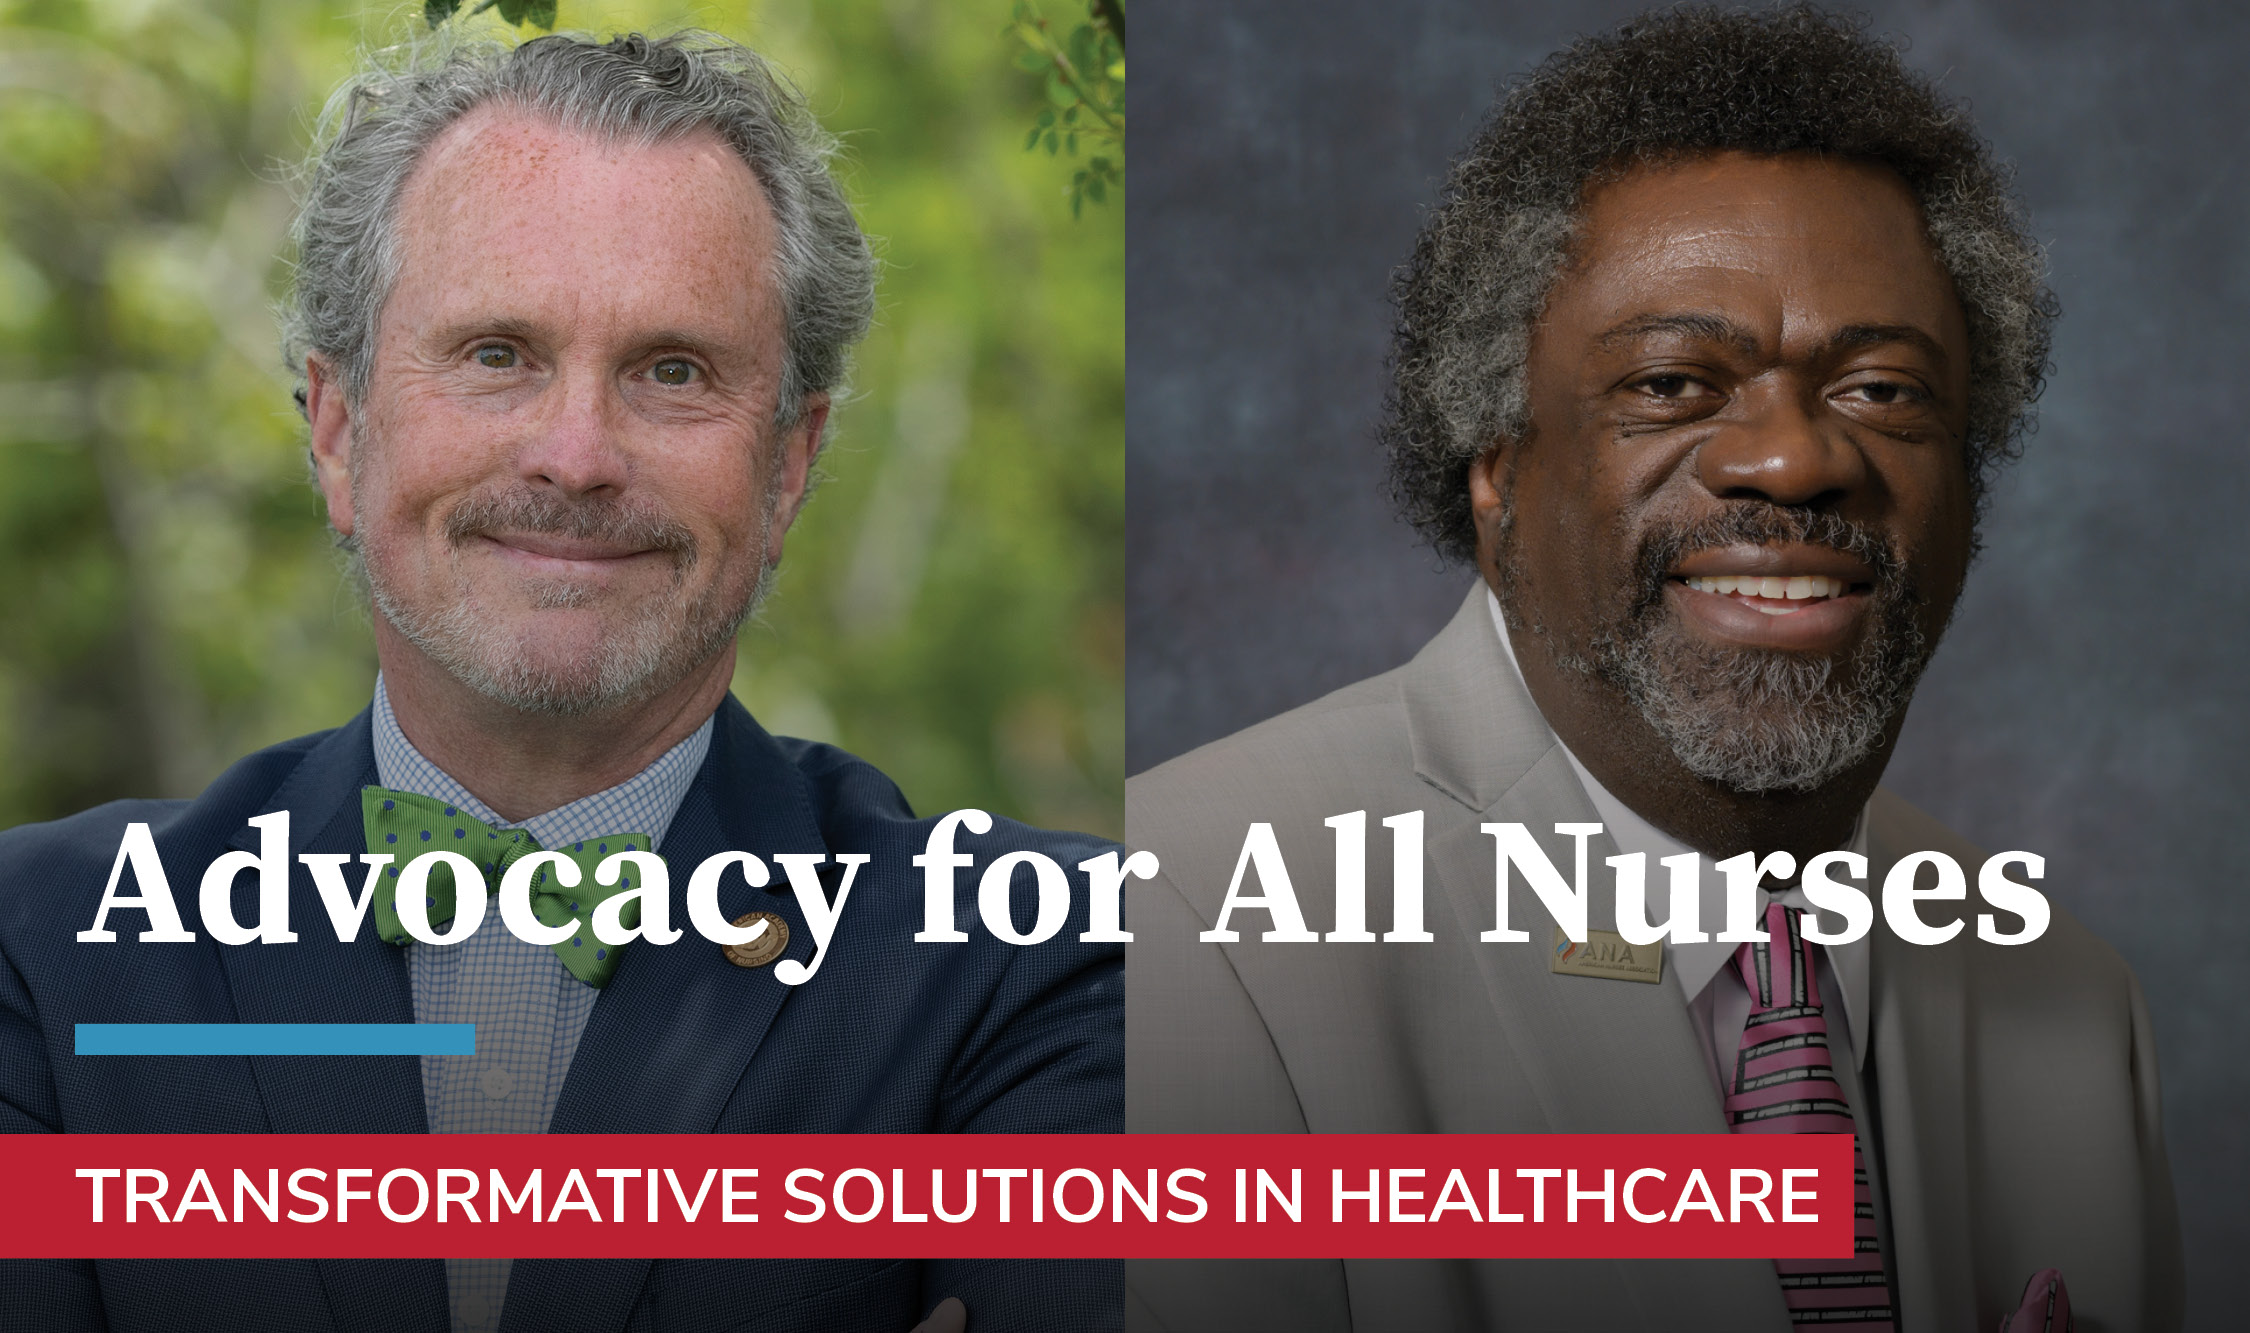 Advocacy for All Nurses | Transformation Solutions in Healthcare